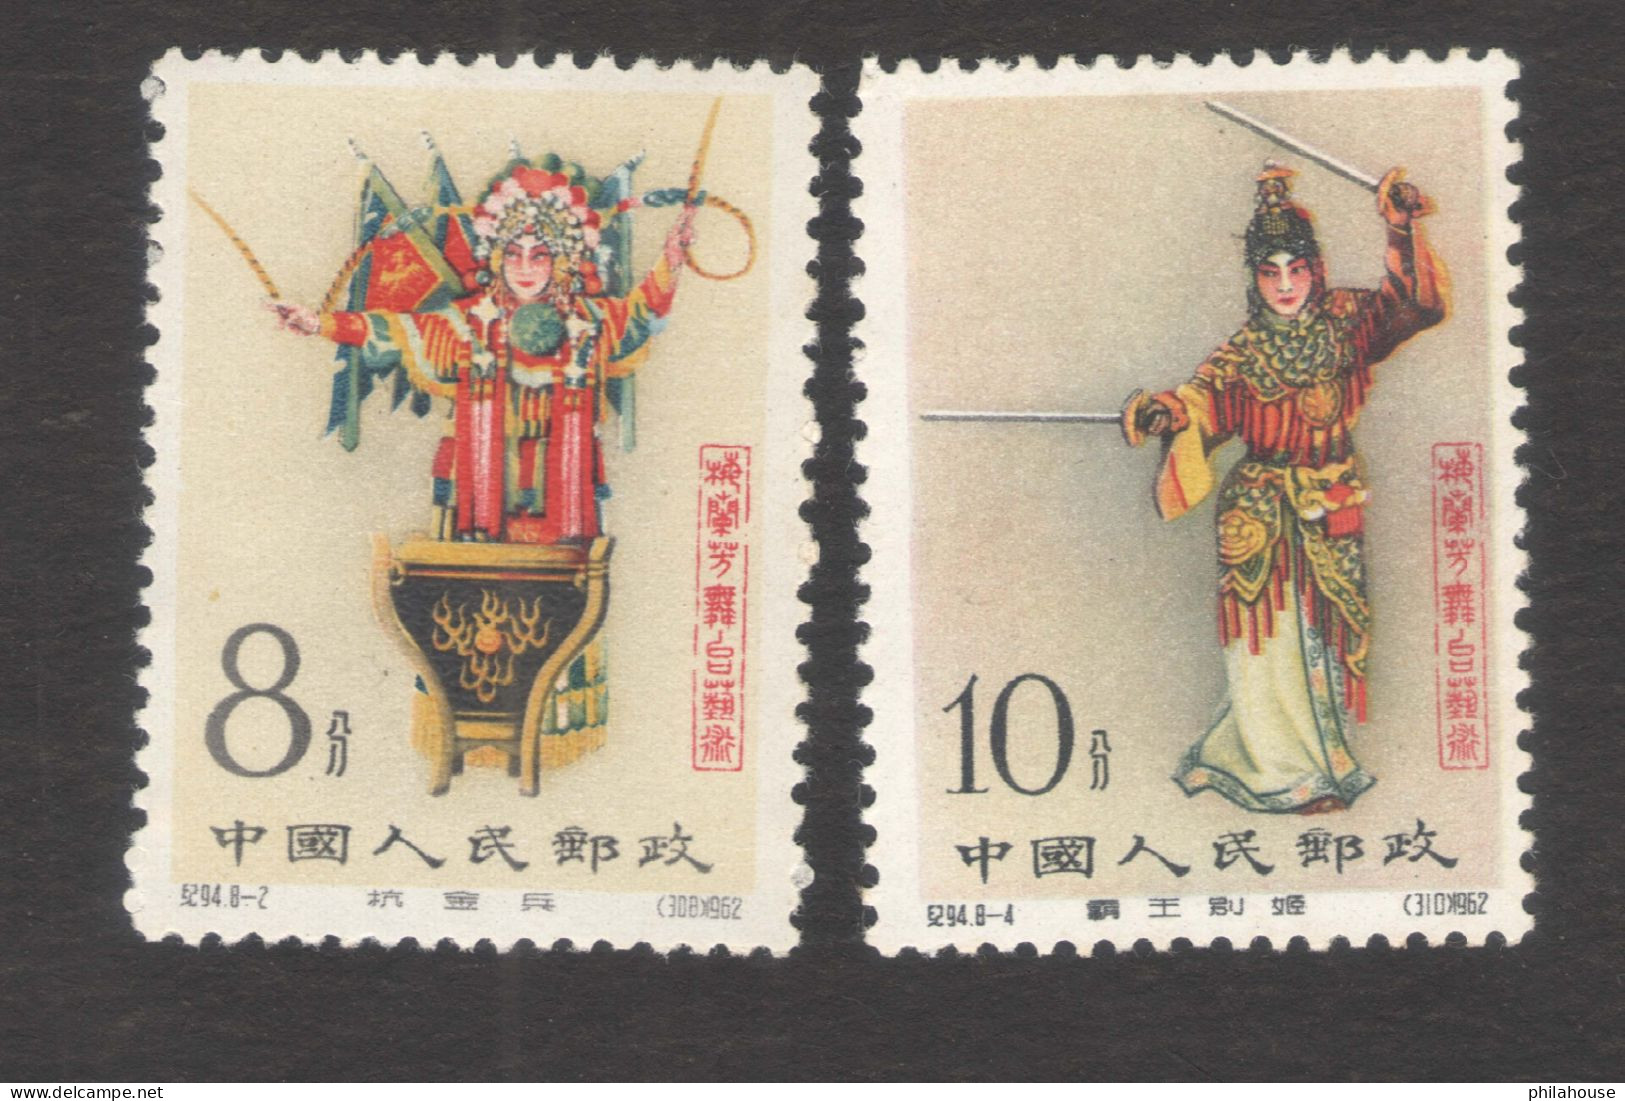 China PRC Mei Lanfang 1962 Stamps Set of 8 Mint Original Gum Genuine Stamps Mint NH Stamps  see Description